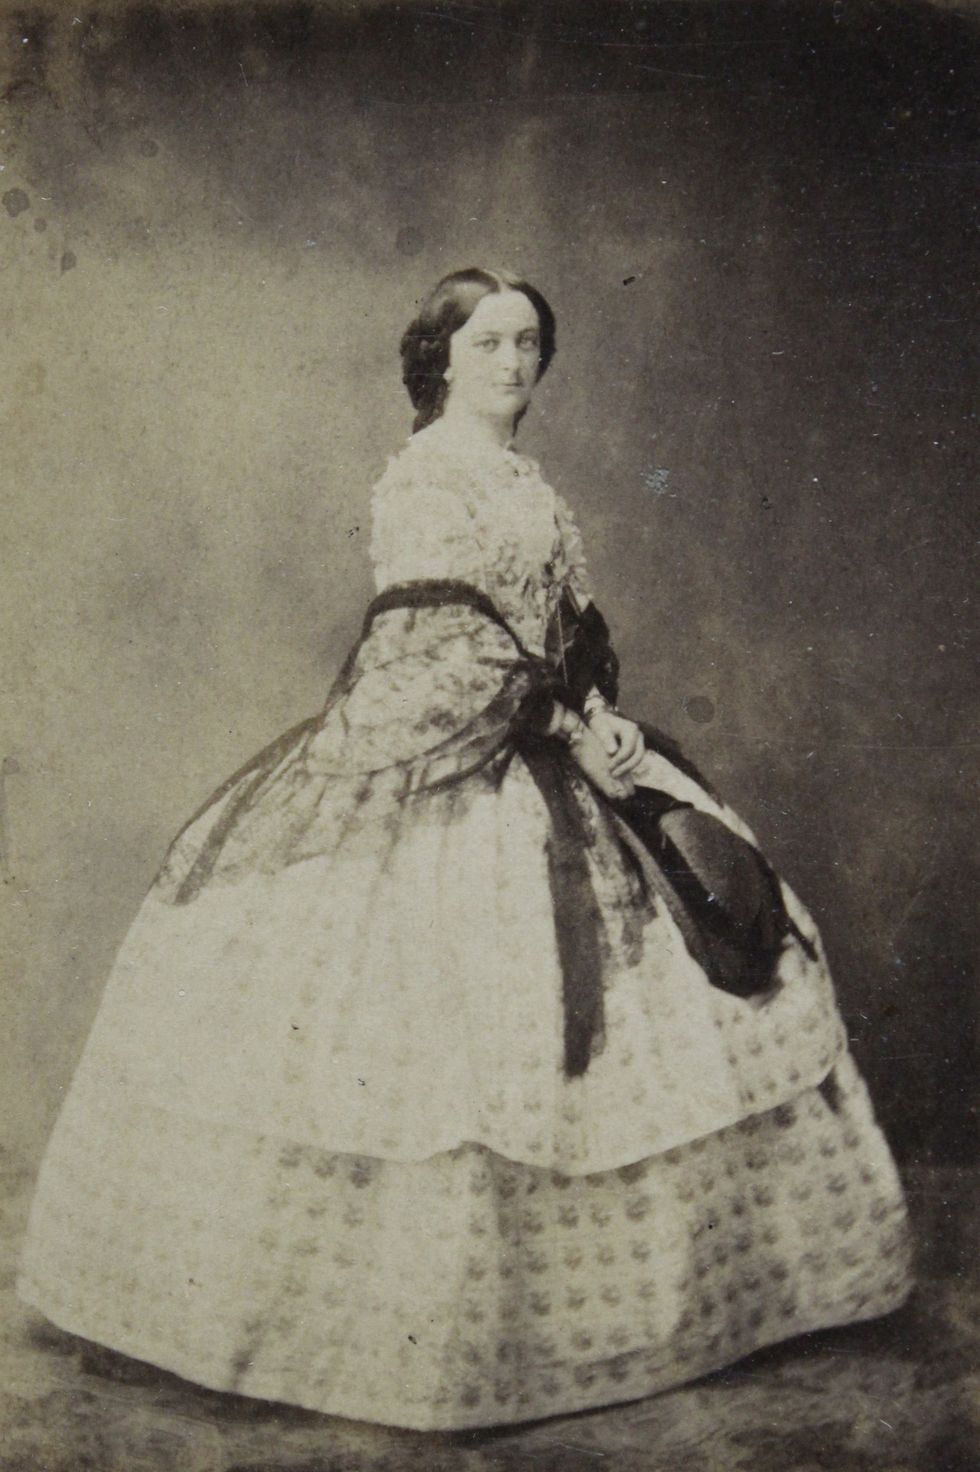 lady in polka dot dress with dark, transparent stole full figure about 1858 photograph by ludwig angerer  vienna old wieden, feldgasse  above the theresianumgasse no 264